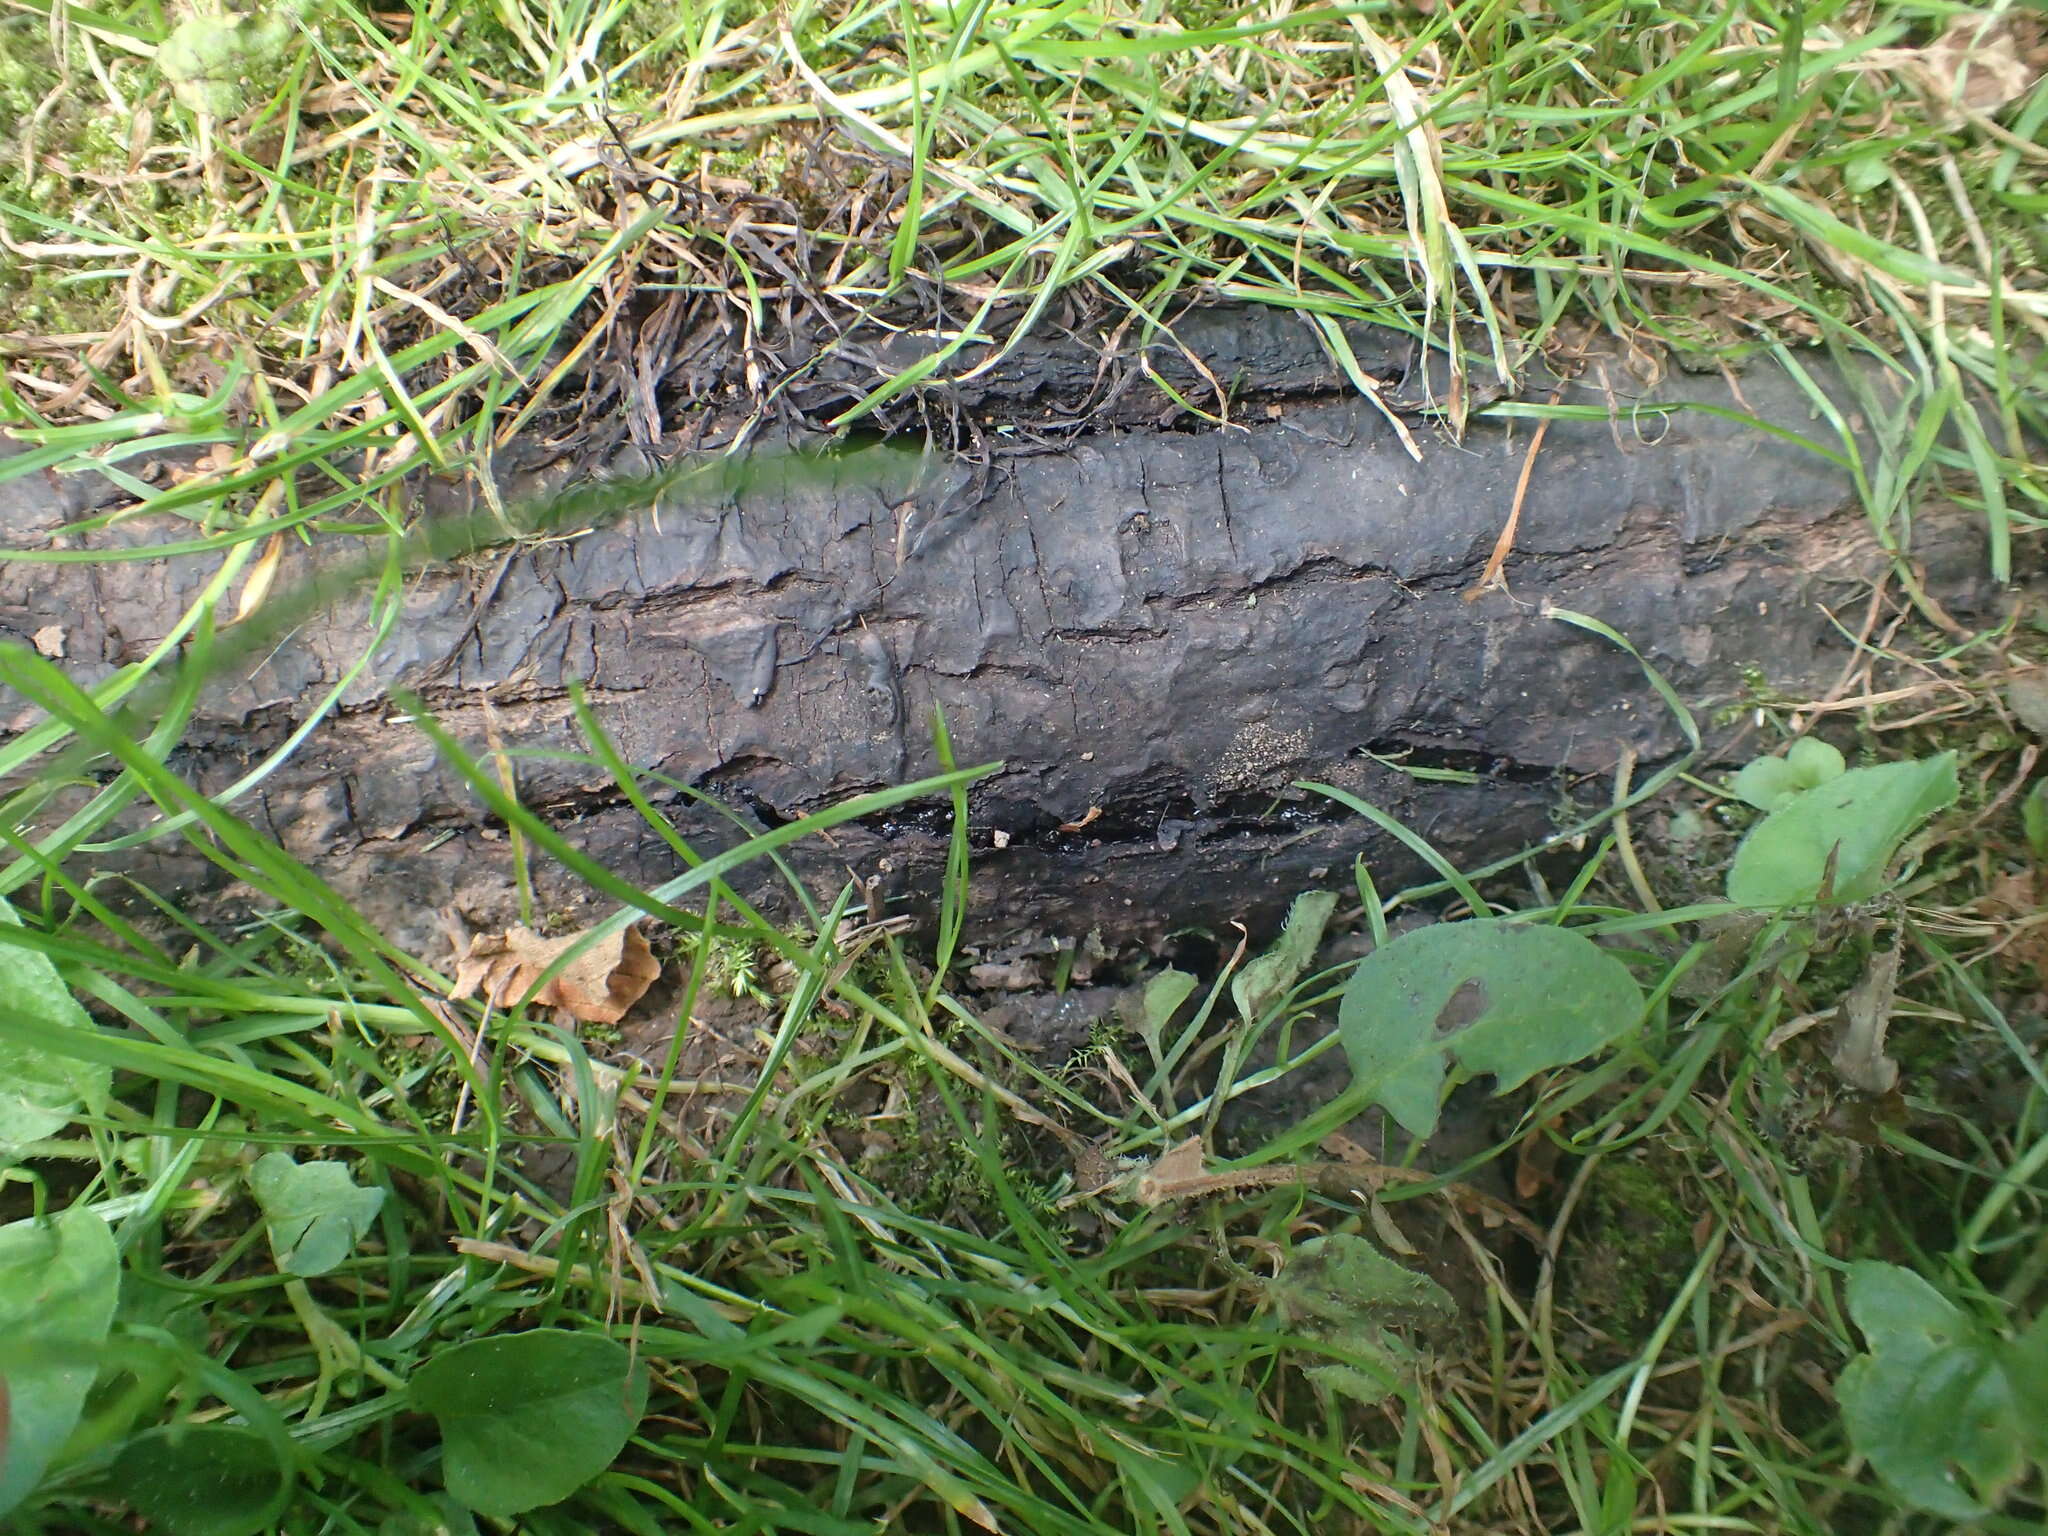 Image of Butternut canker fungus